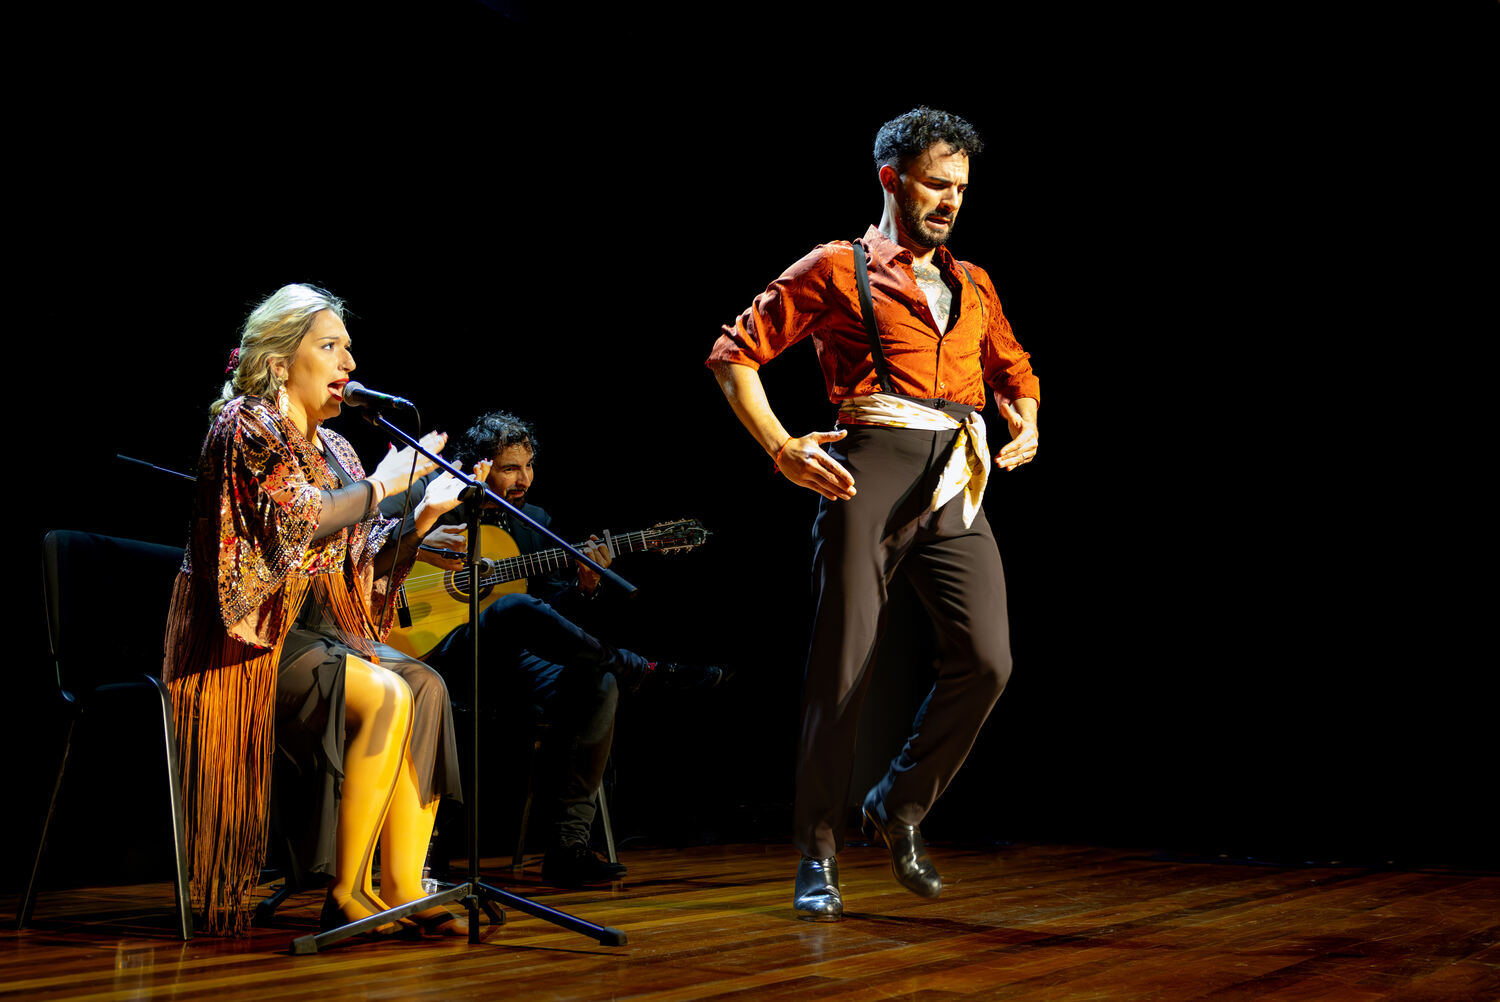 Man dancing Flamenco in a black room with a man playing guitar and a woman singing